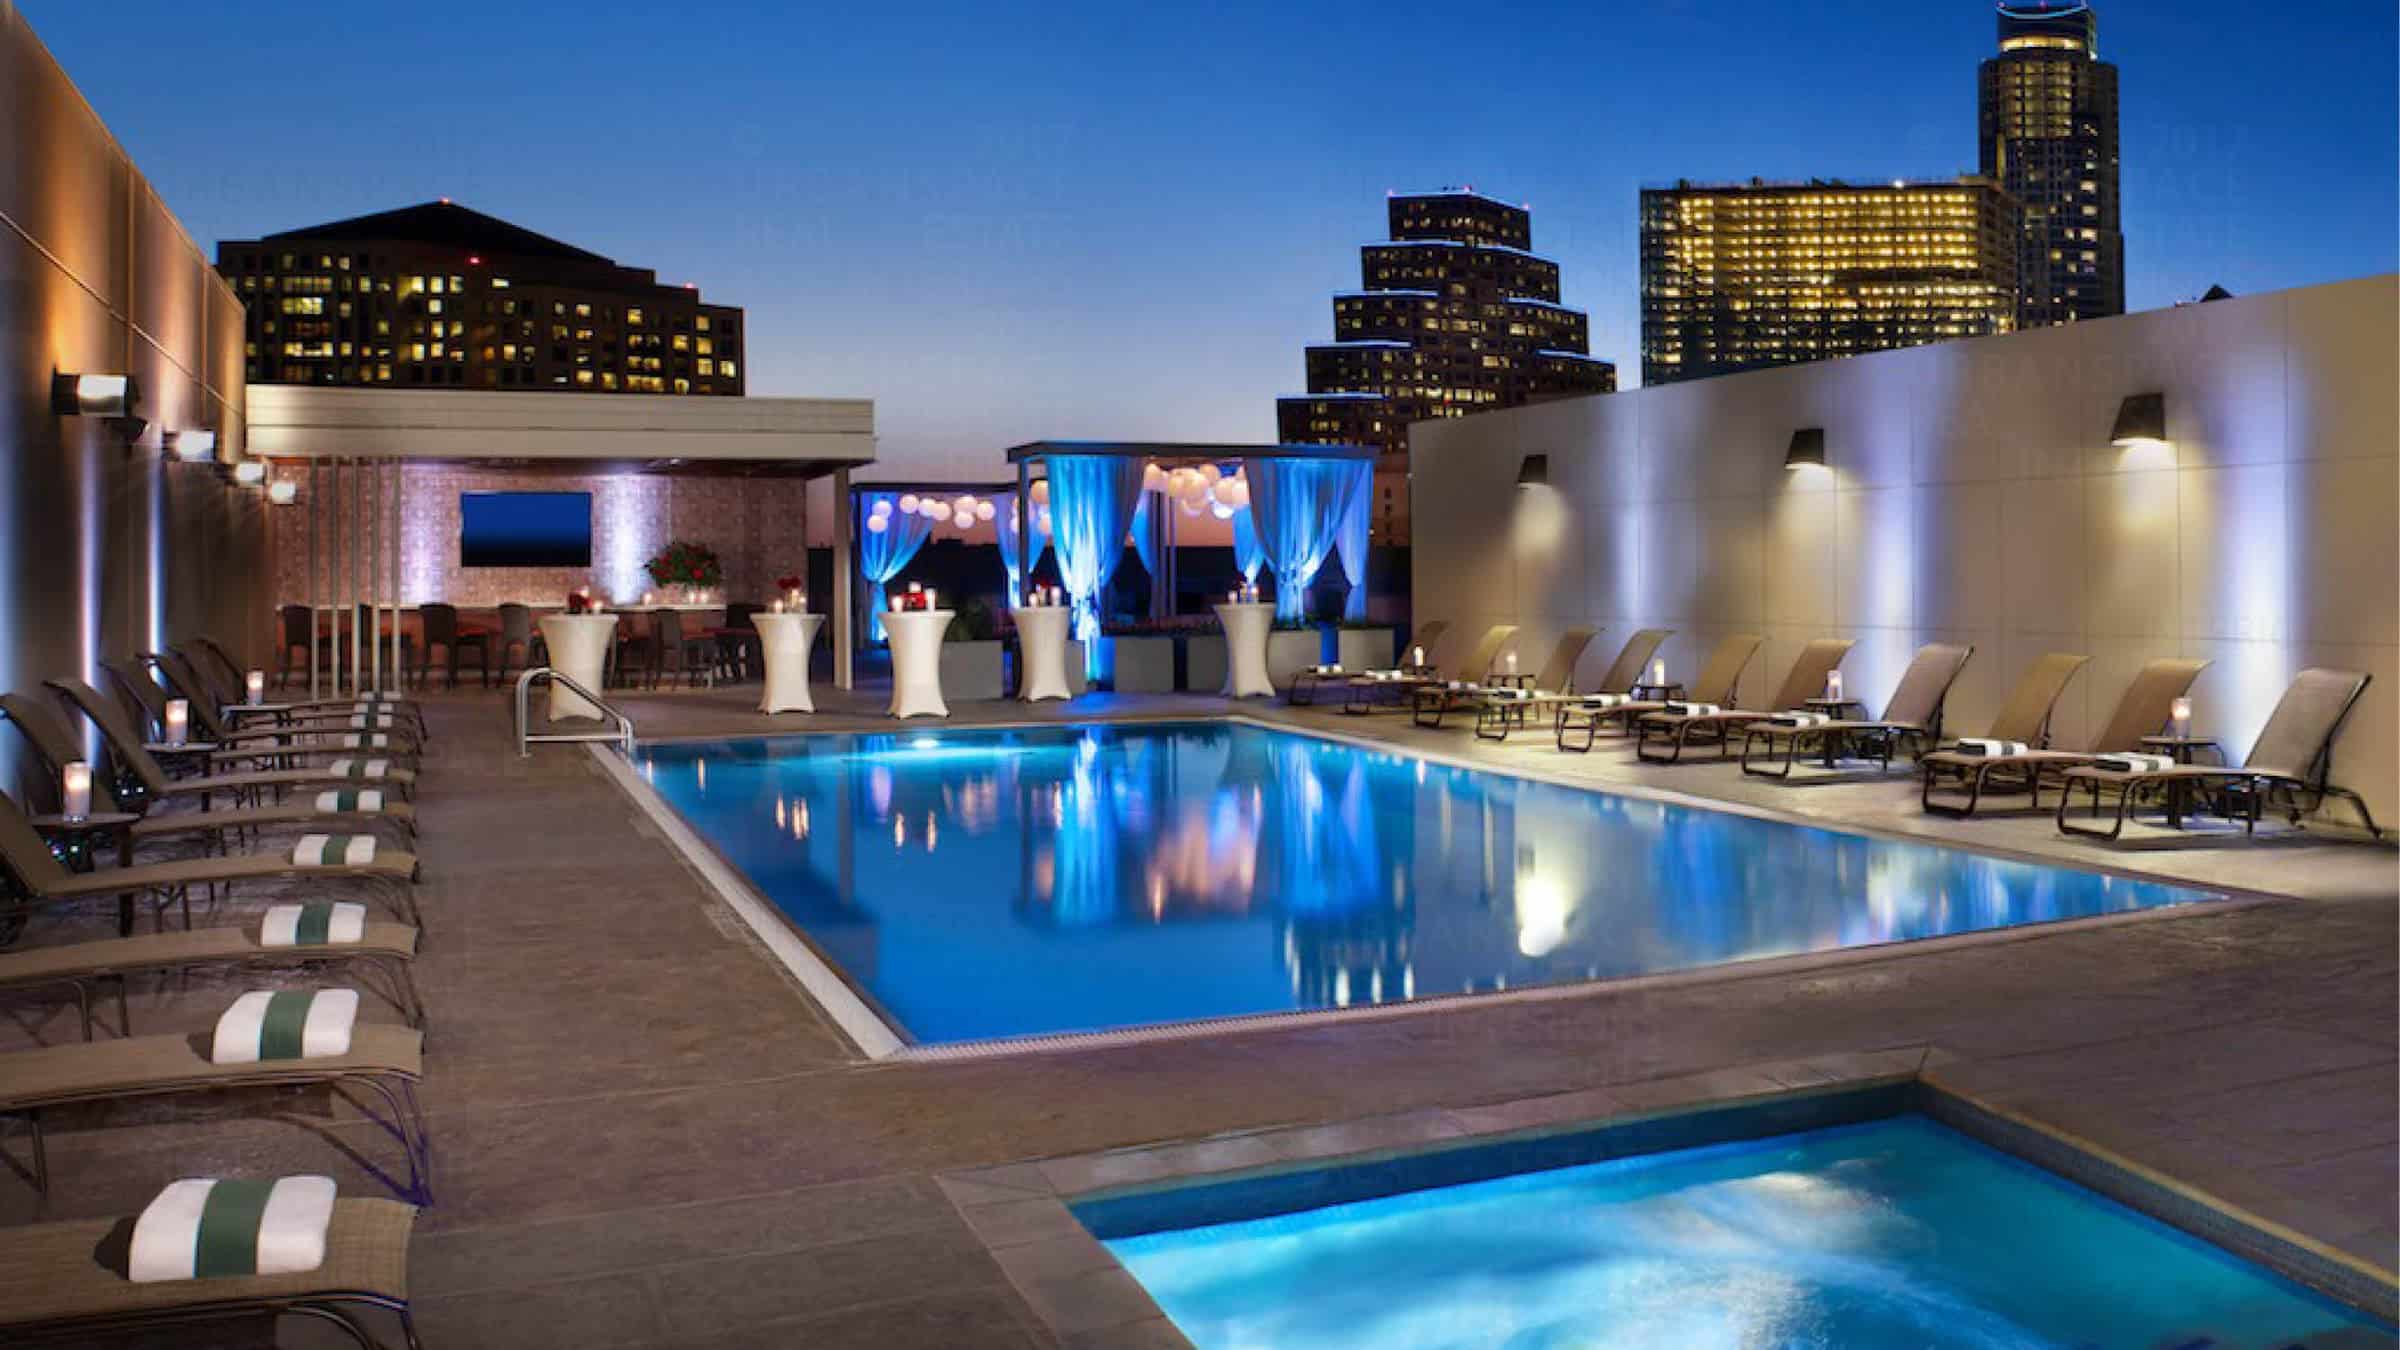 5 fifty five downtown austin condo rooftop pool